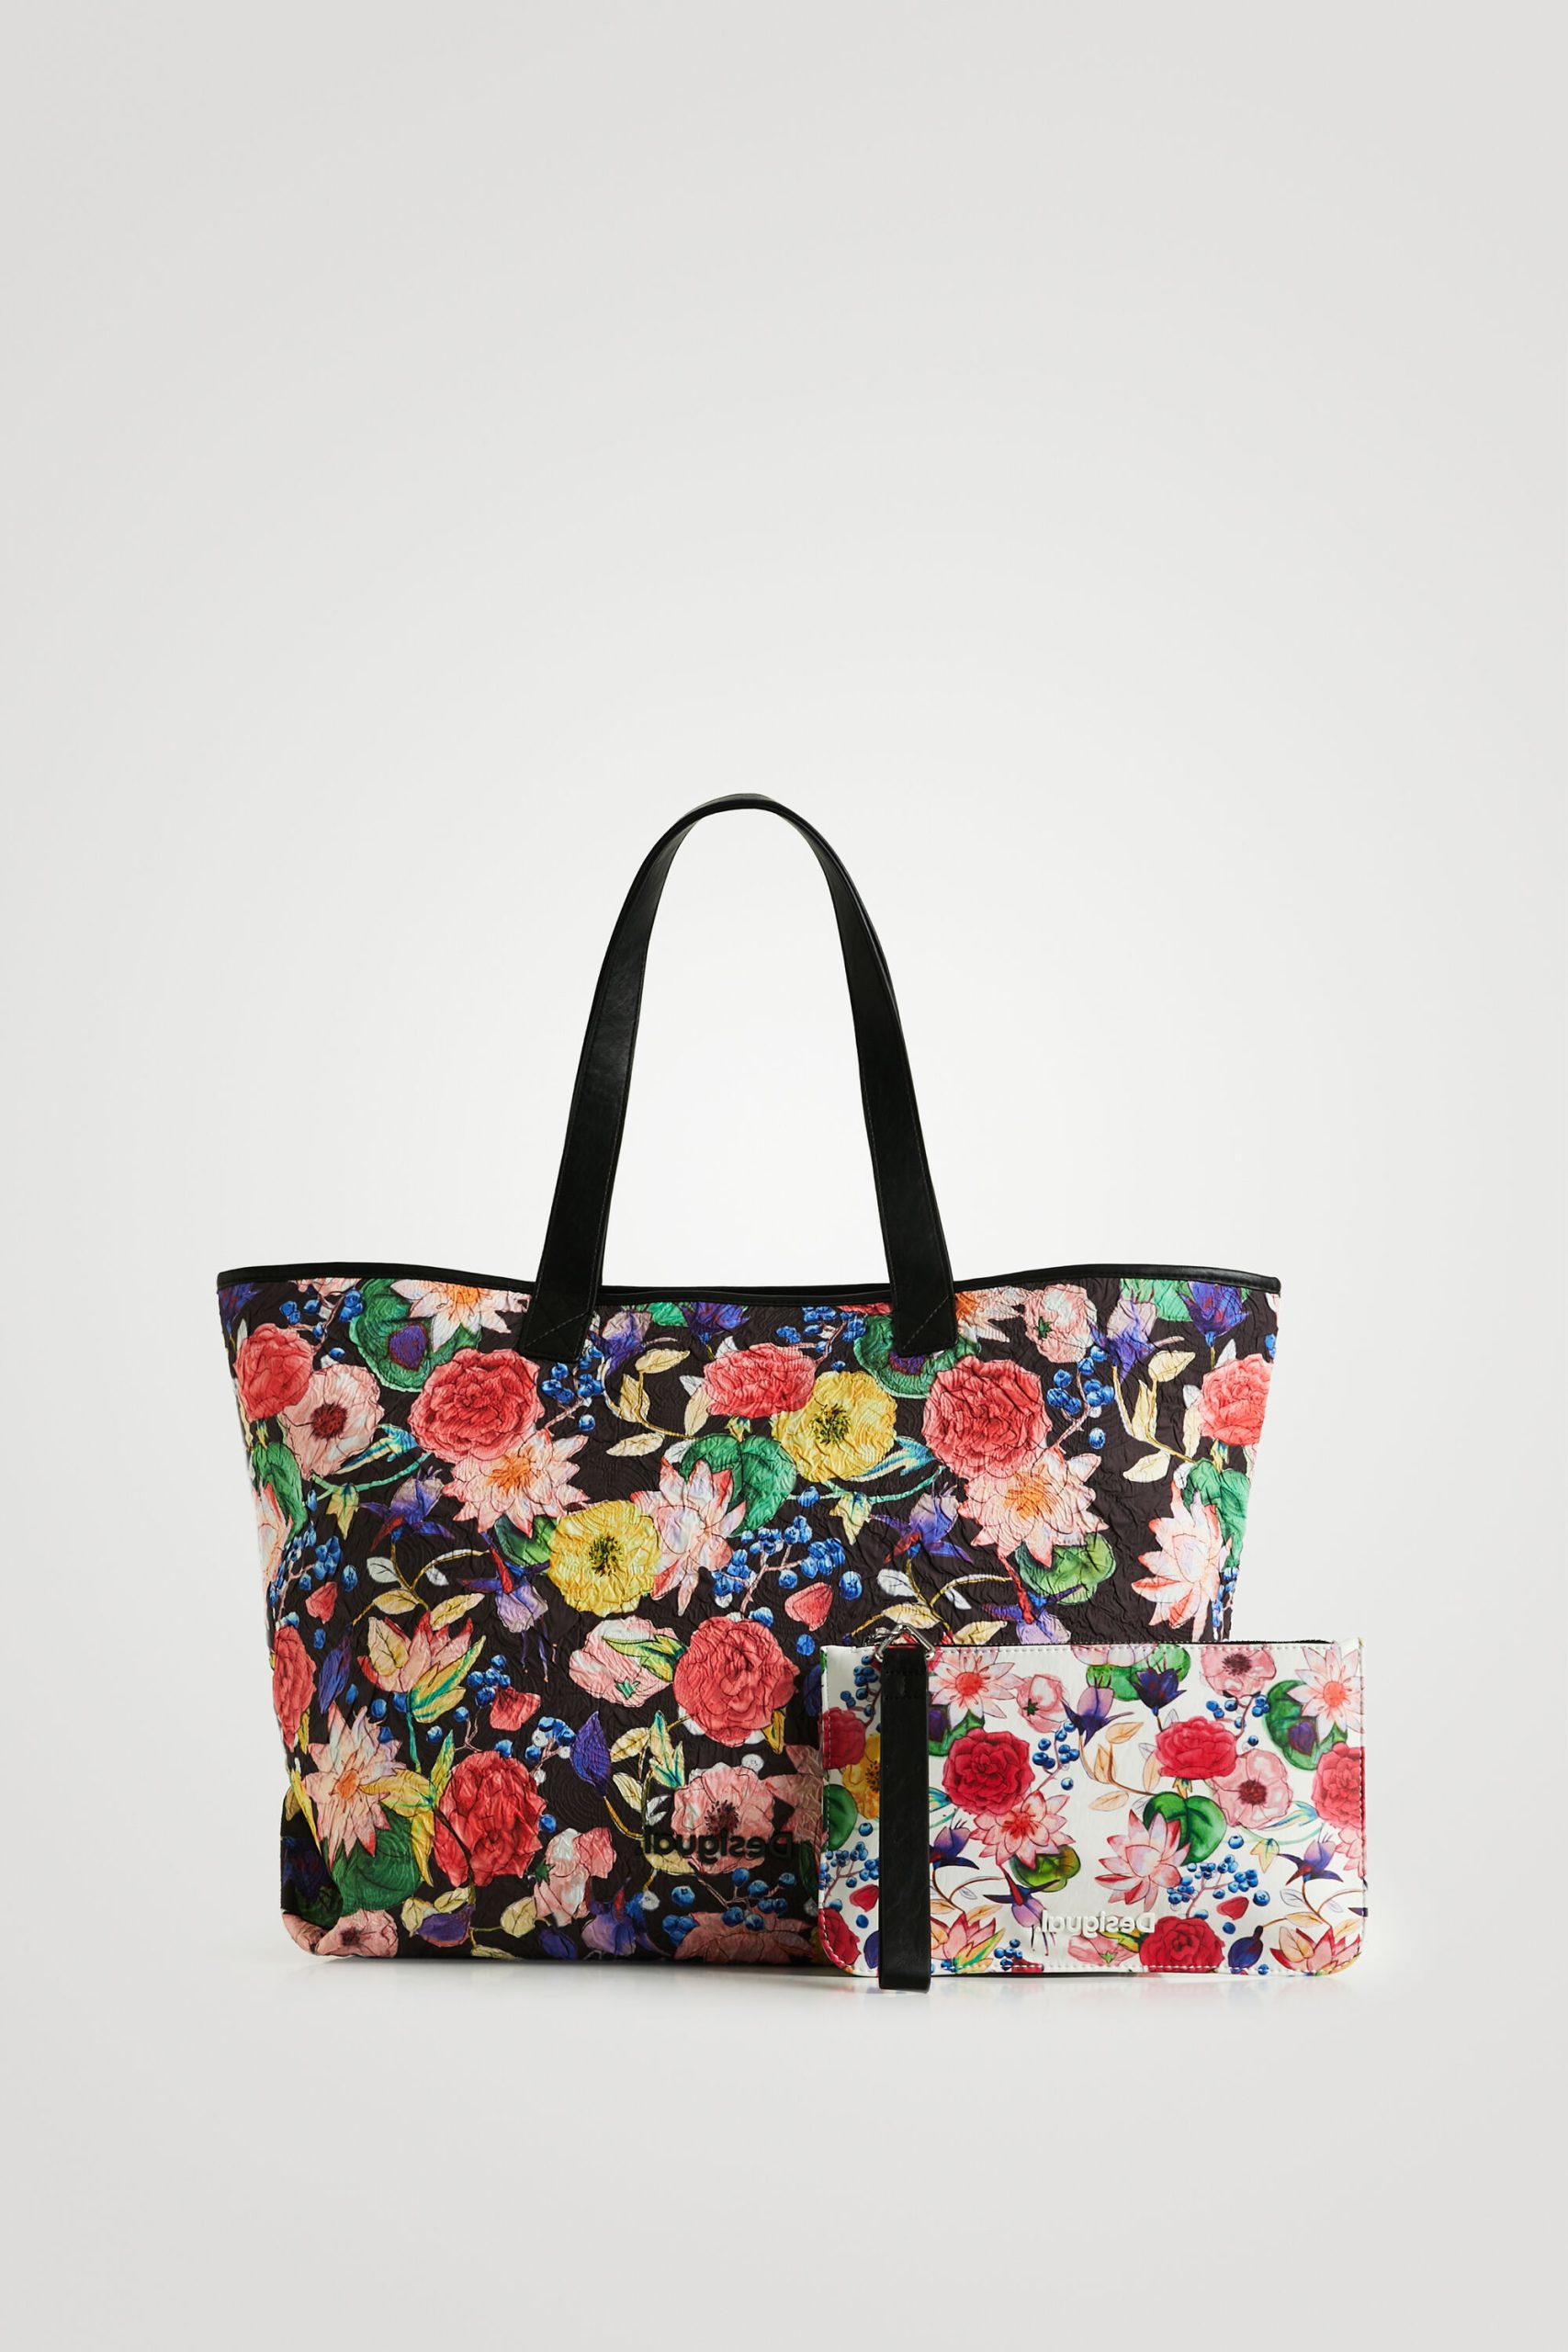 TREAT YOURSELF TO A DESIGNER BAG THIS EASTER – Siopaella Designer Exchange